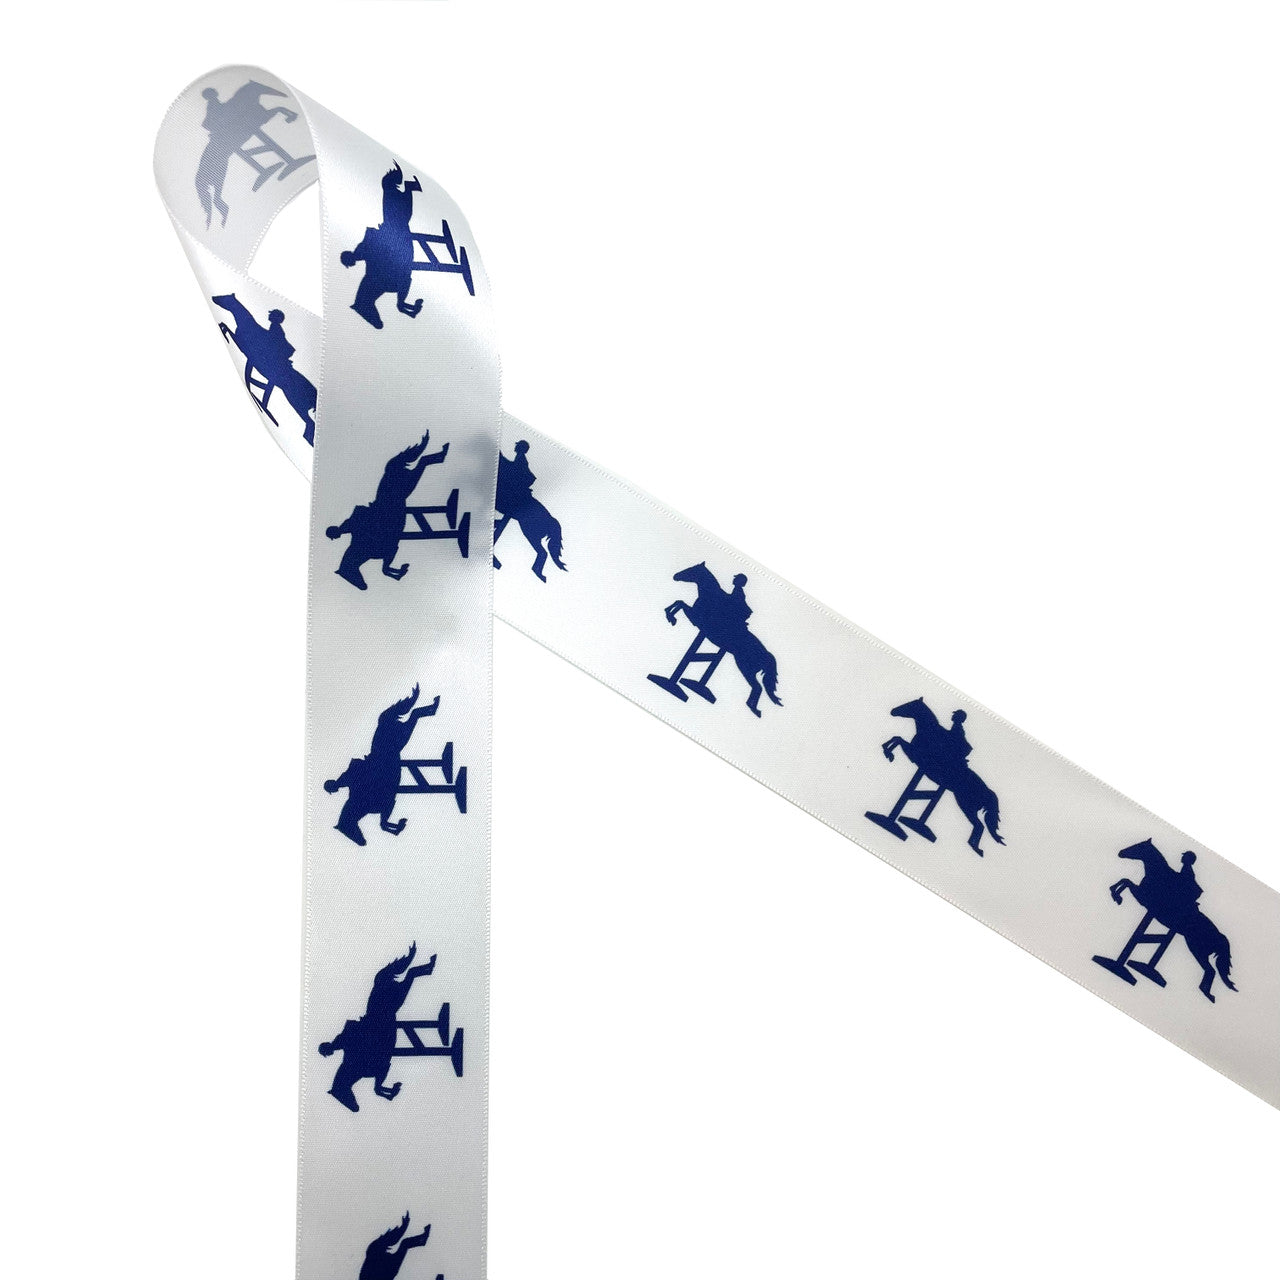 Horse jumping fences in navy blue printed on 1.5" white satin ribbon is ideal for the equestrian in your life. This classic design is perfect for pony finals ribbons, hair bows, horse shows, head bands, party decor, floral design and craft projects. Be sure to have this ribbon on hand for quilting and sewing projects too! All our ribbon is designed and printed in the USA